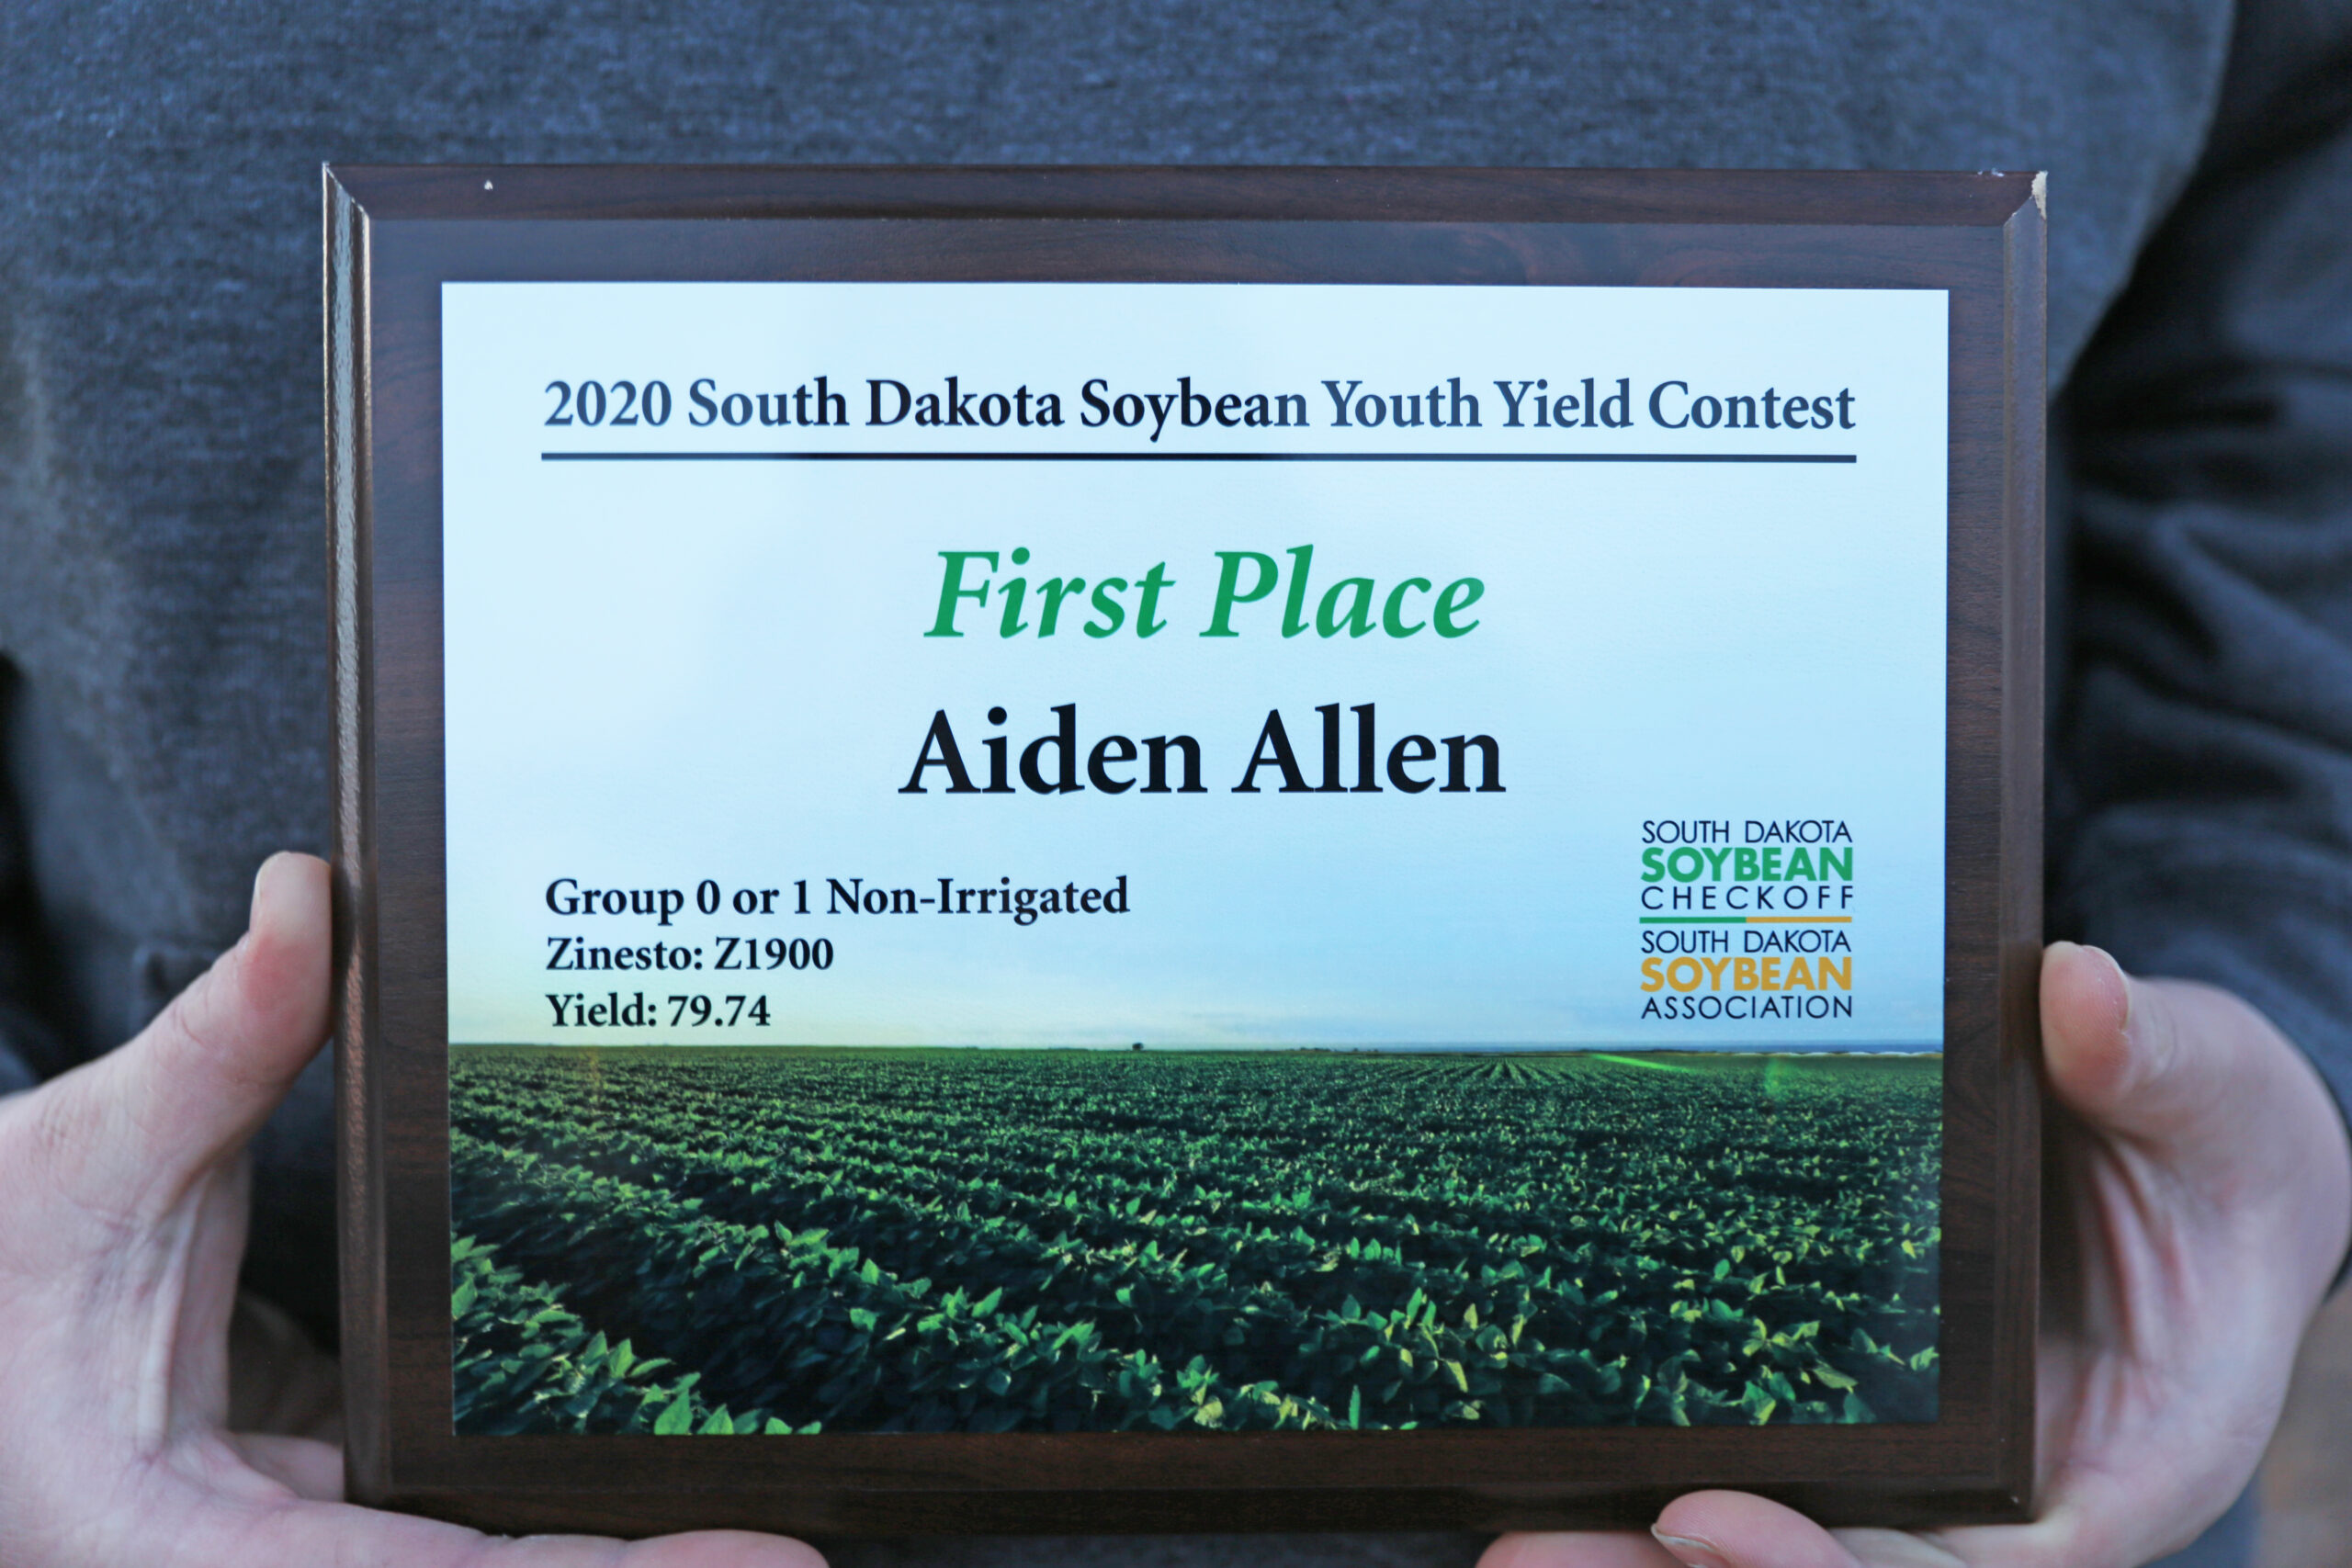 Aiden’s plaque for winning first place in the 2020 South Dakota Soybean Youth Yield Contest.